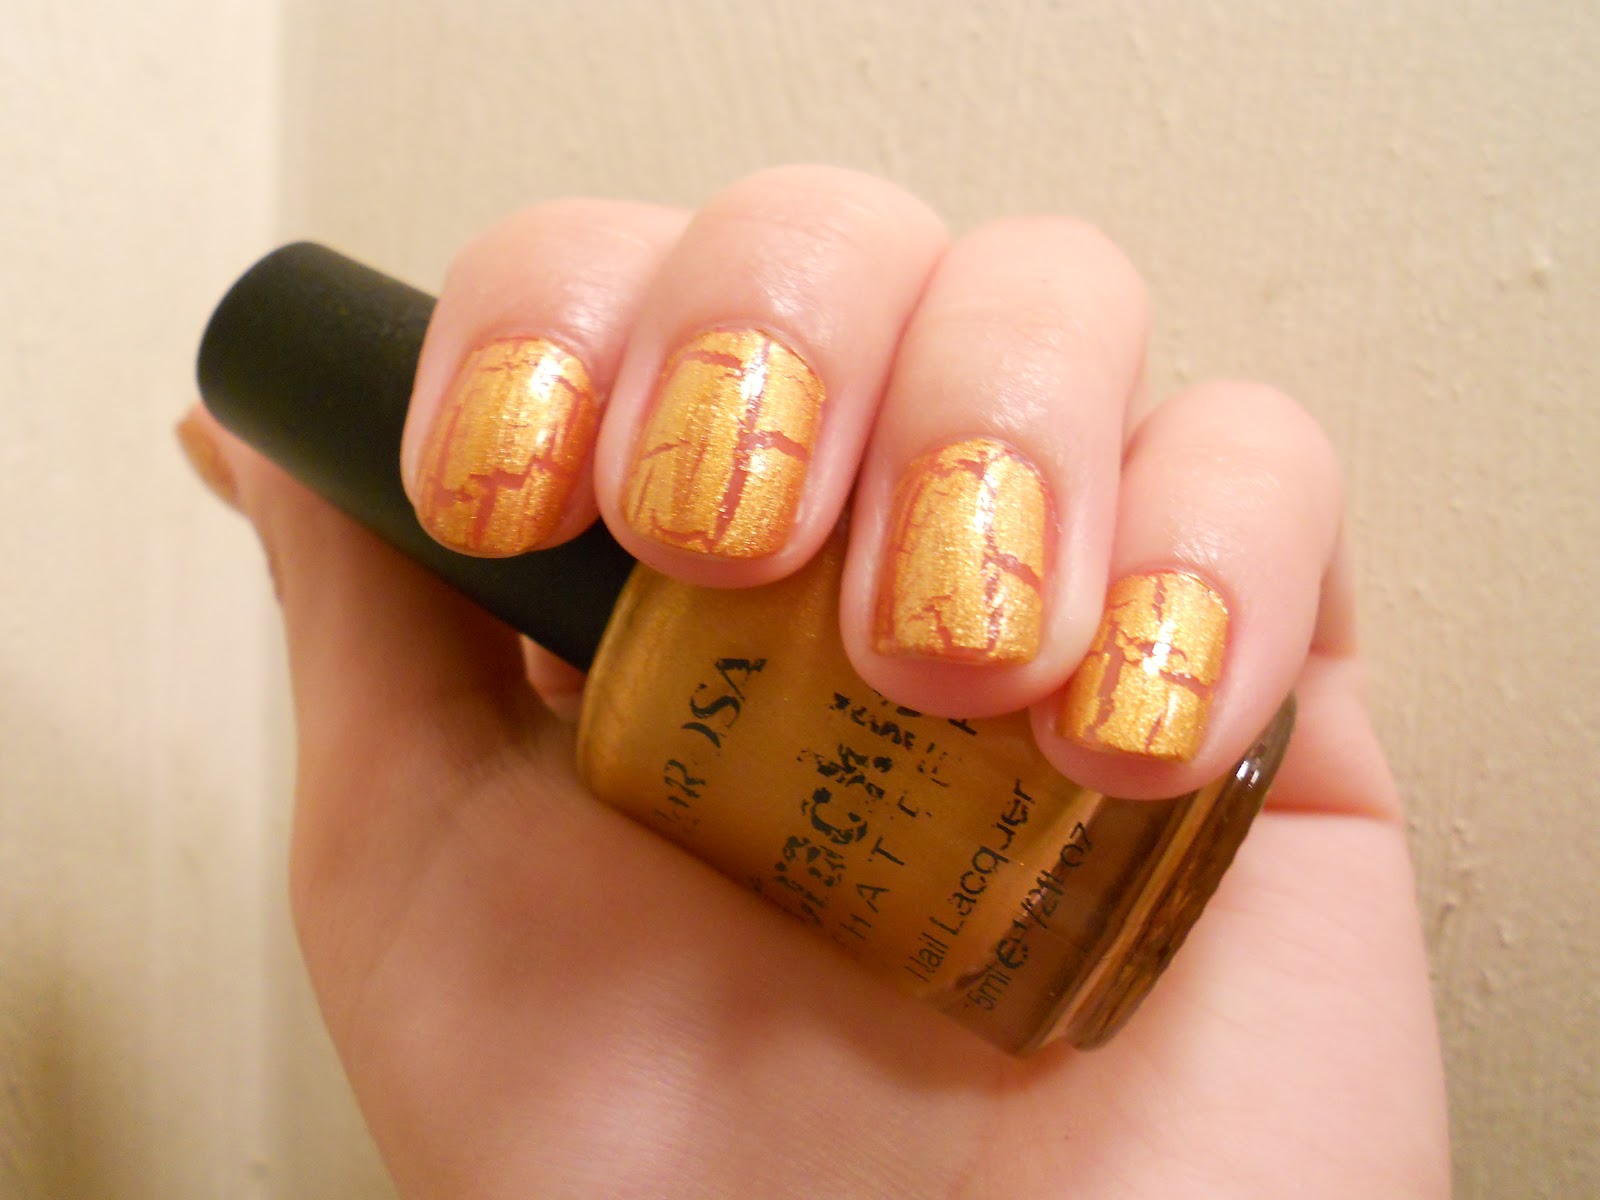 1. "Rome Collection" Nail Polish in "October Sunset" - wide 5